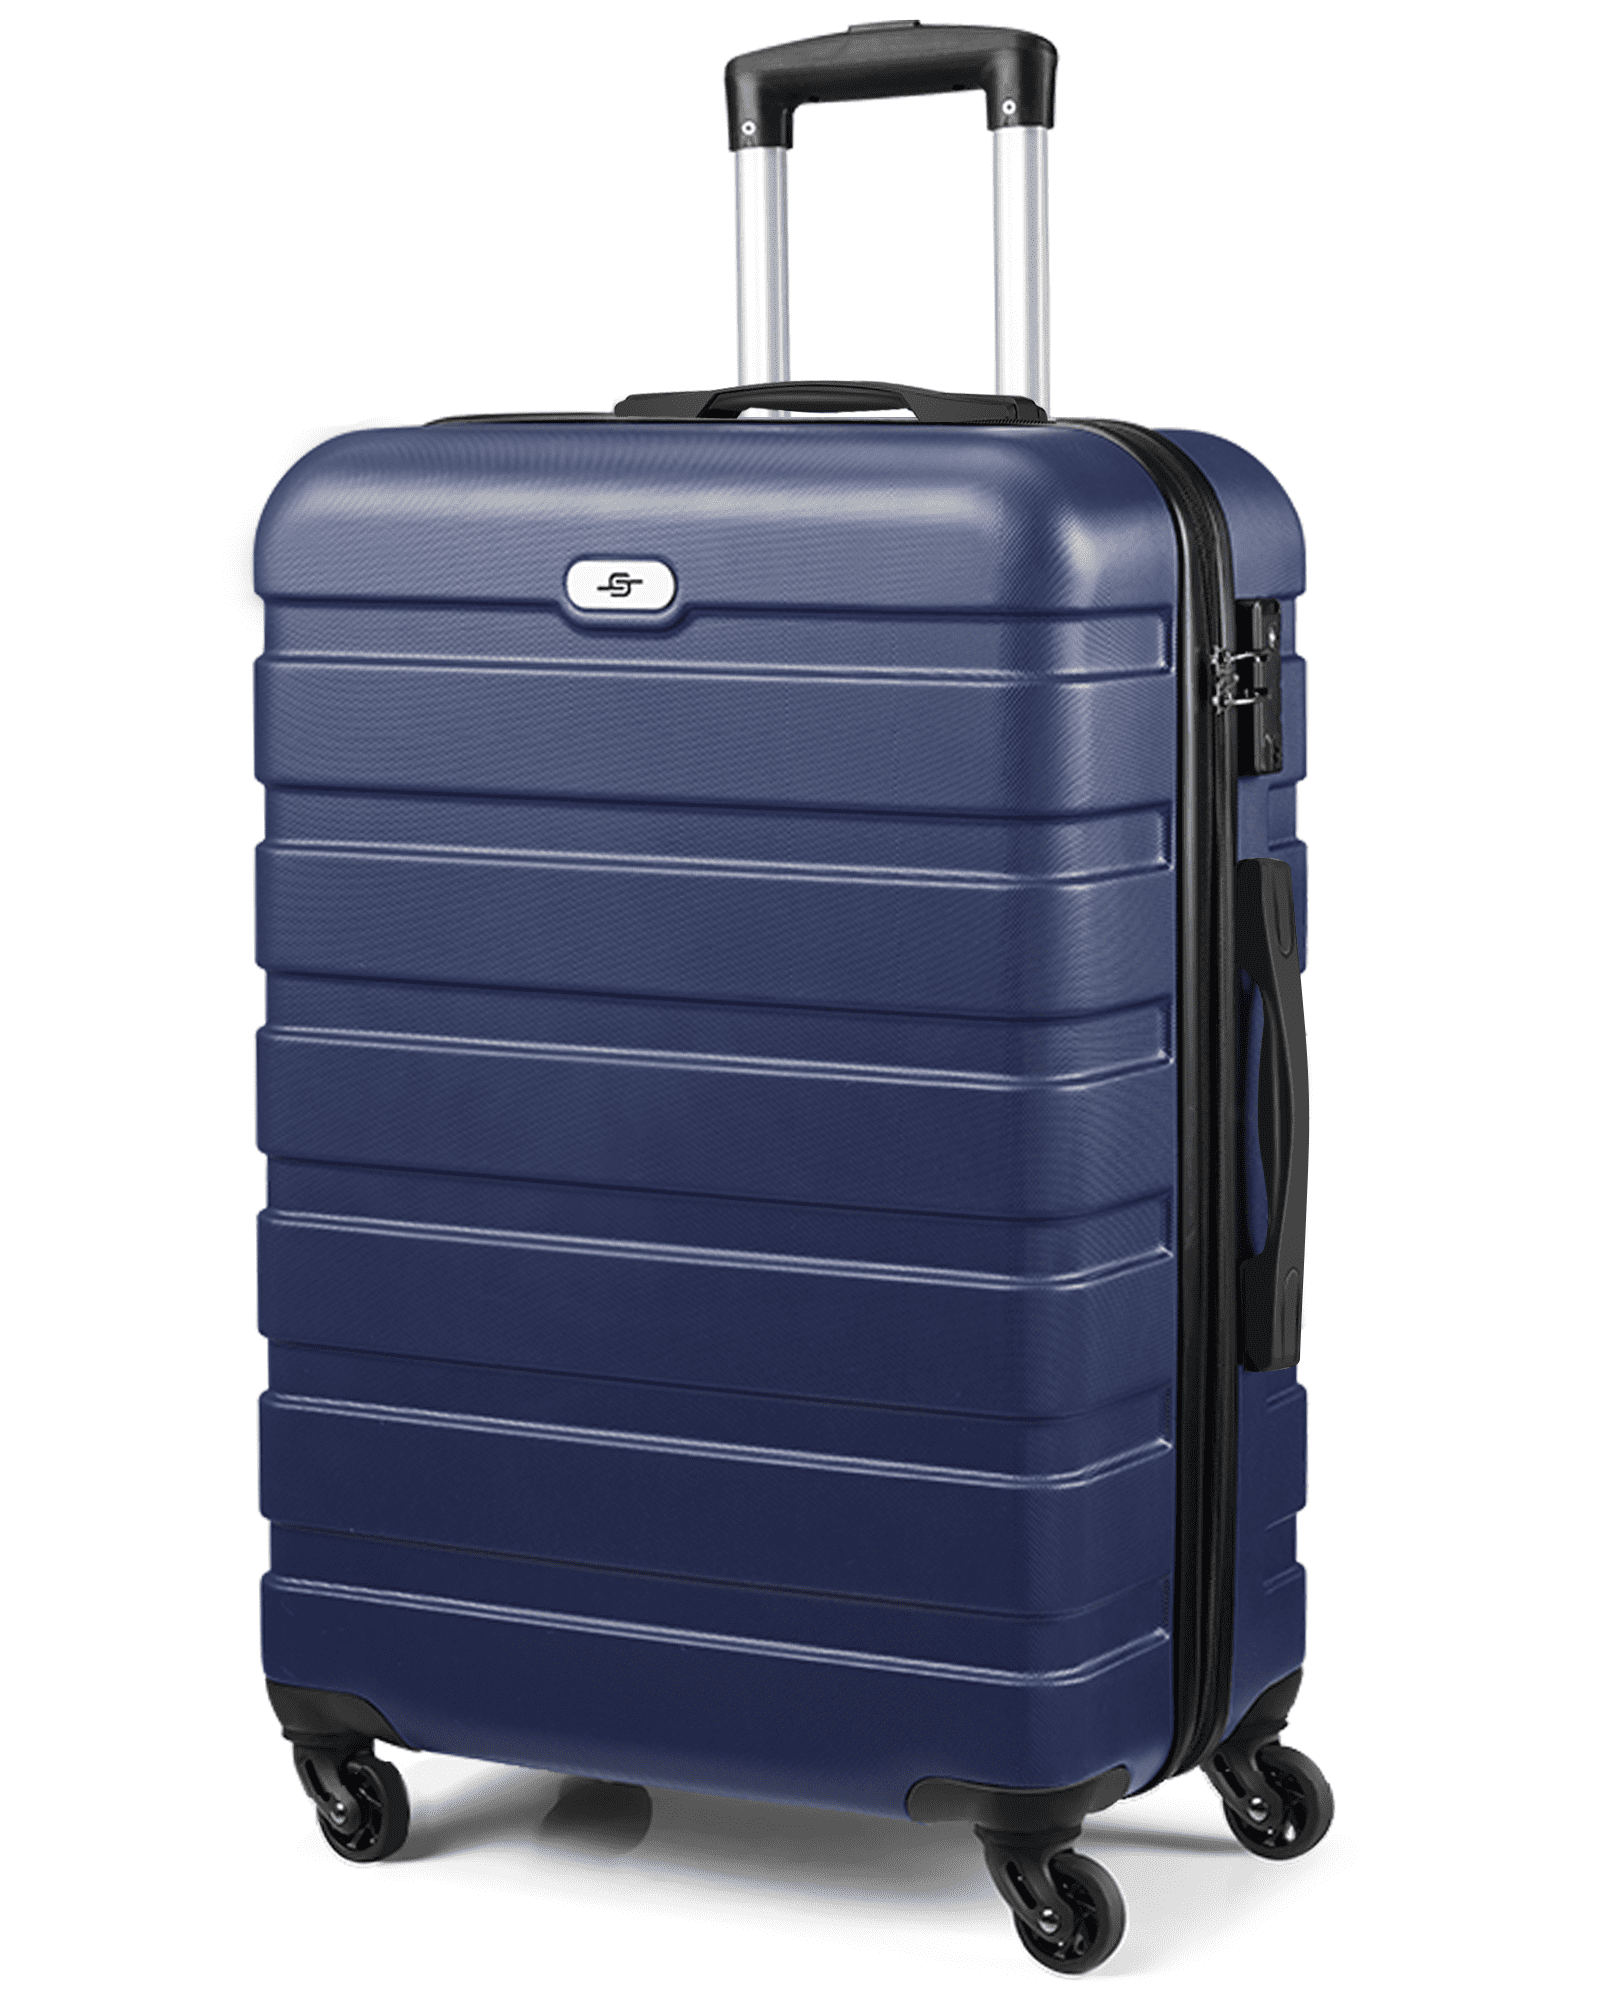 28 Hardside Luggage, Checked Suitcase with TSA Lock Spinner Wheels, Bright  Blue 